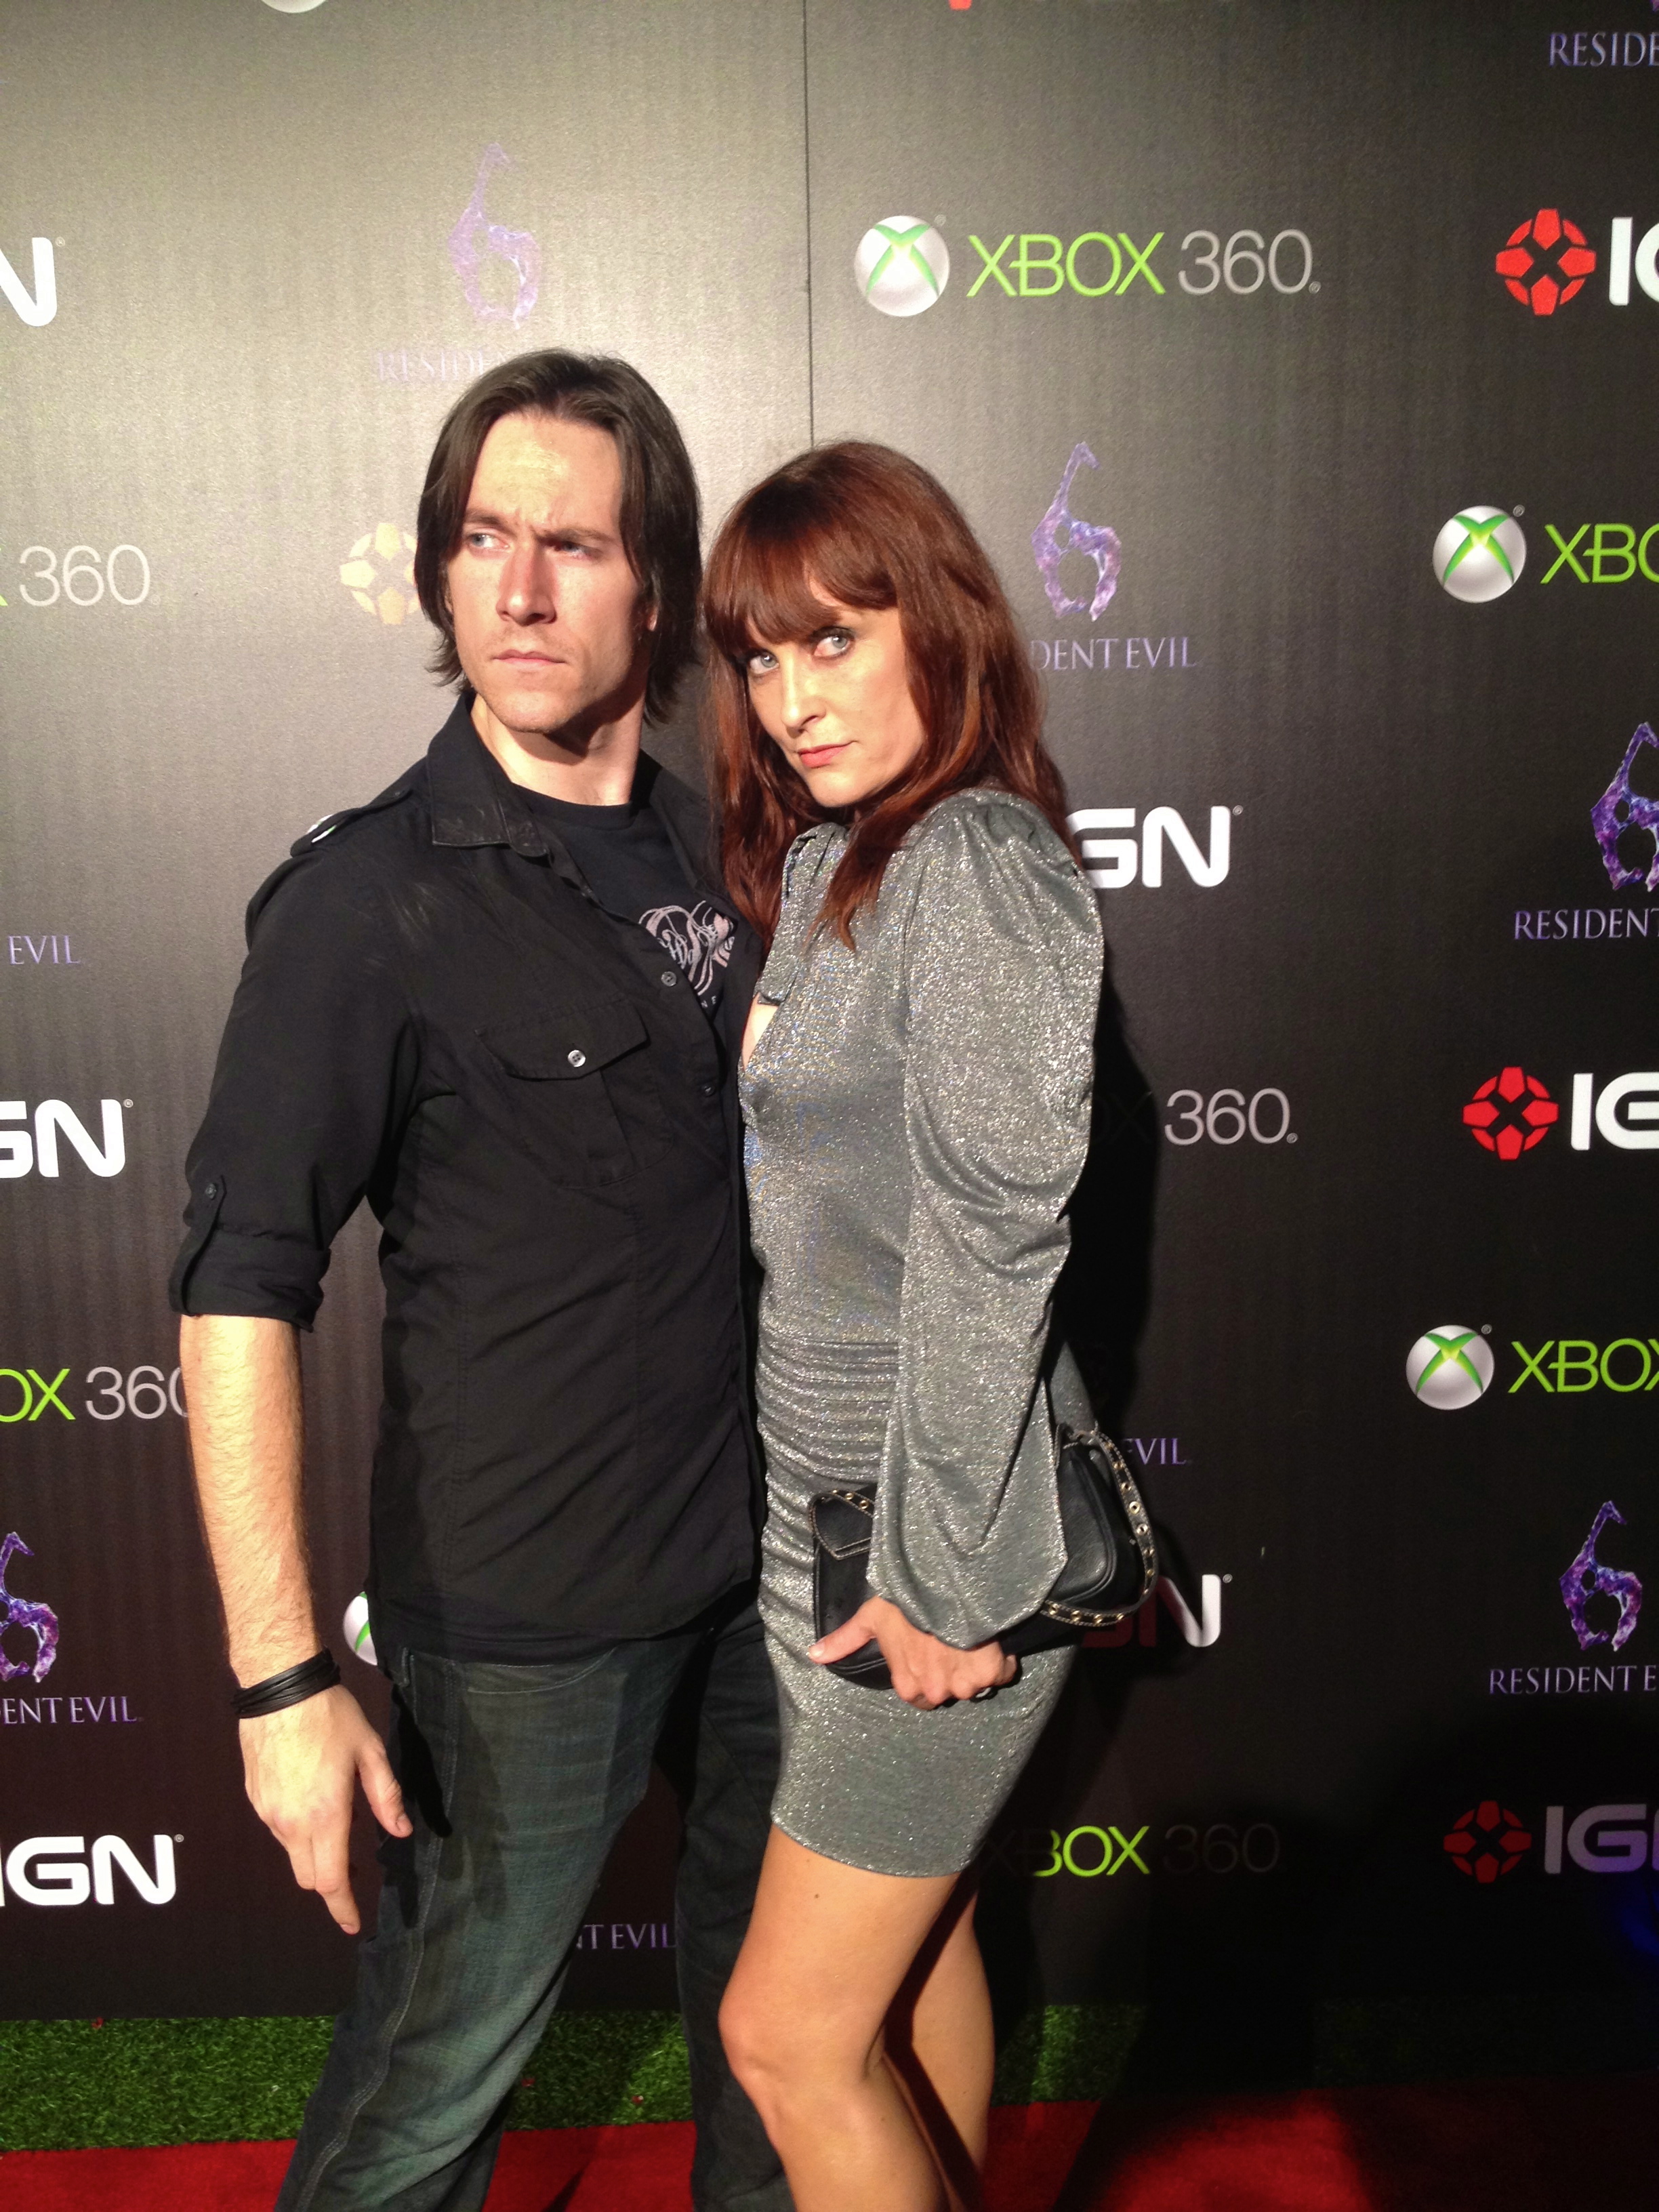 With fellow cast member Matthew Mercer at IGN Resident Evil 6 party ComiCon 2012